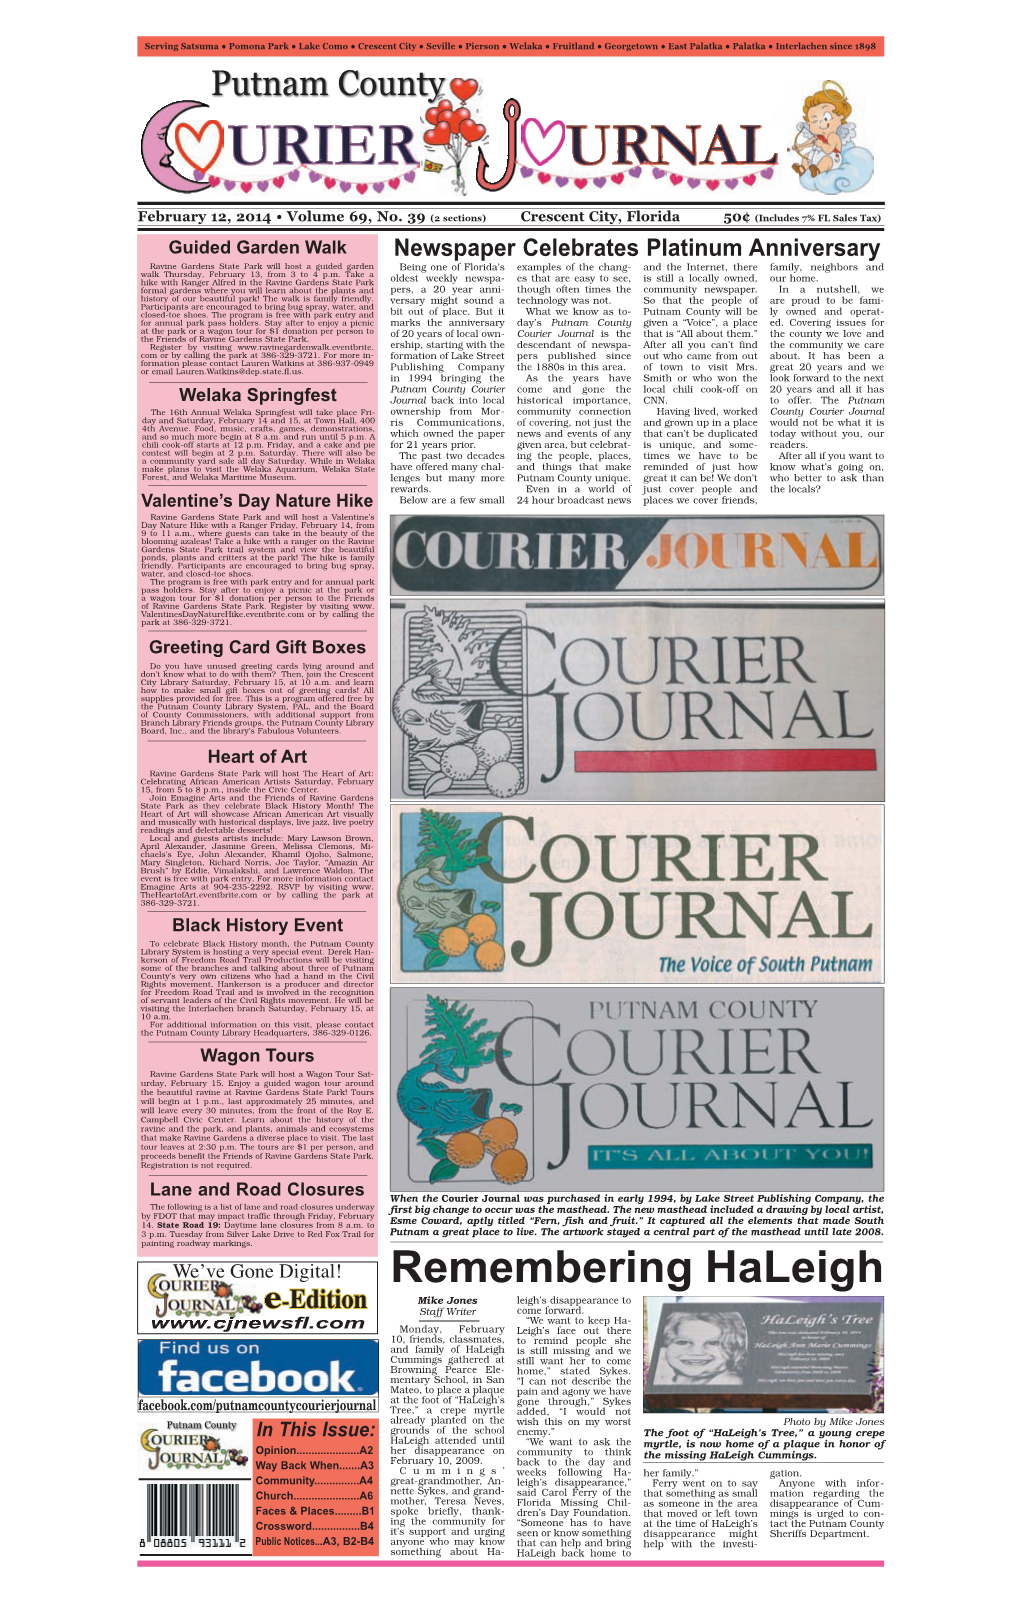 Remembering Haleigh Mike Jones Leigh’S Disappearance to E-Edition Staff Writer Come Forward